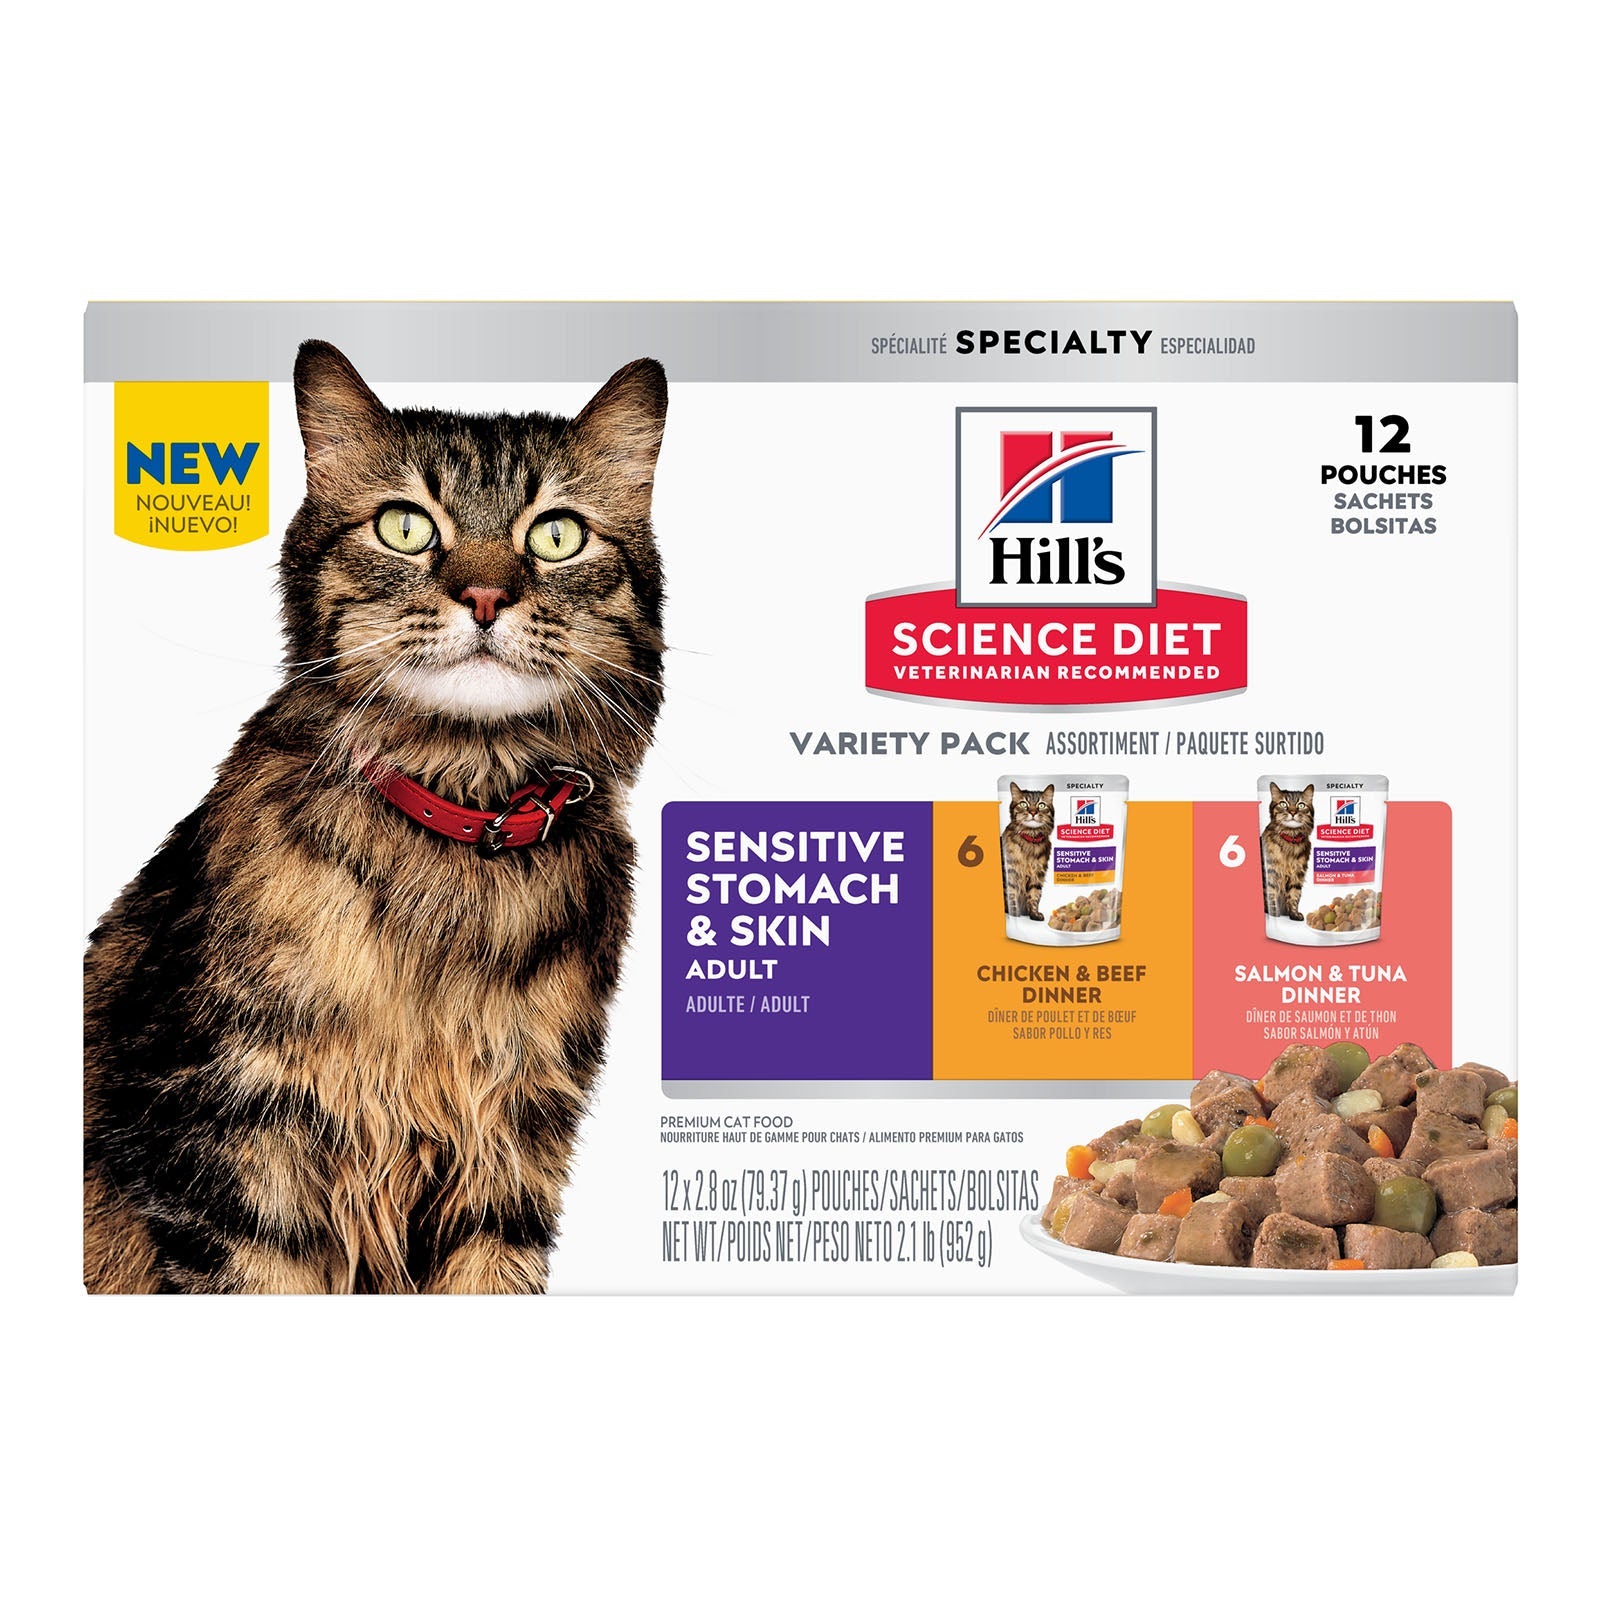 Hill's Science Diet Sensitve Stomach and Skin Cat Food Variety Pouches 12x79g - Woonona Petfood & Produce